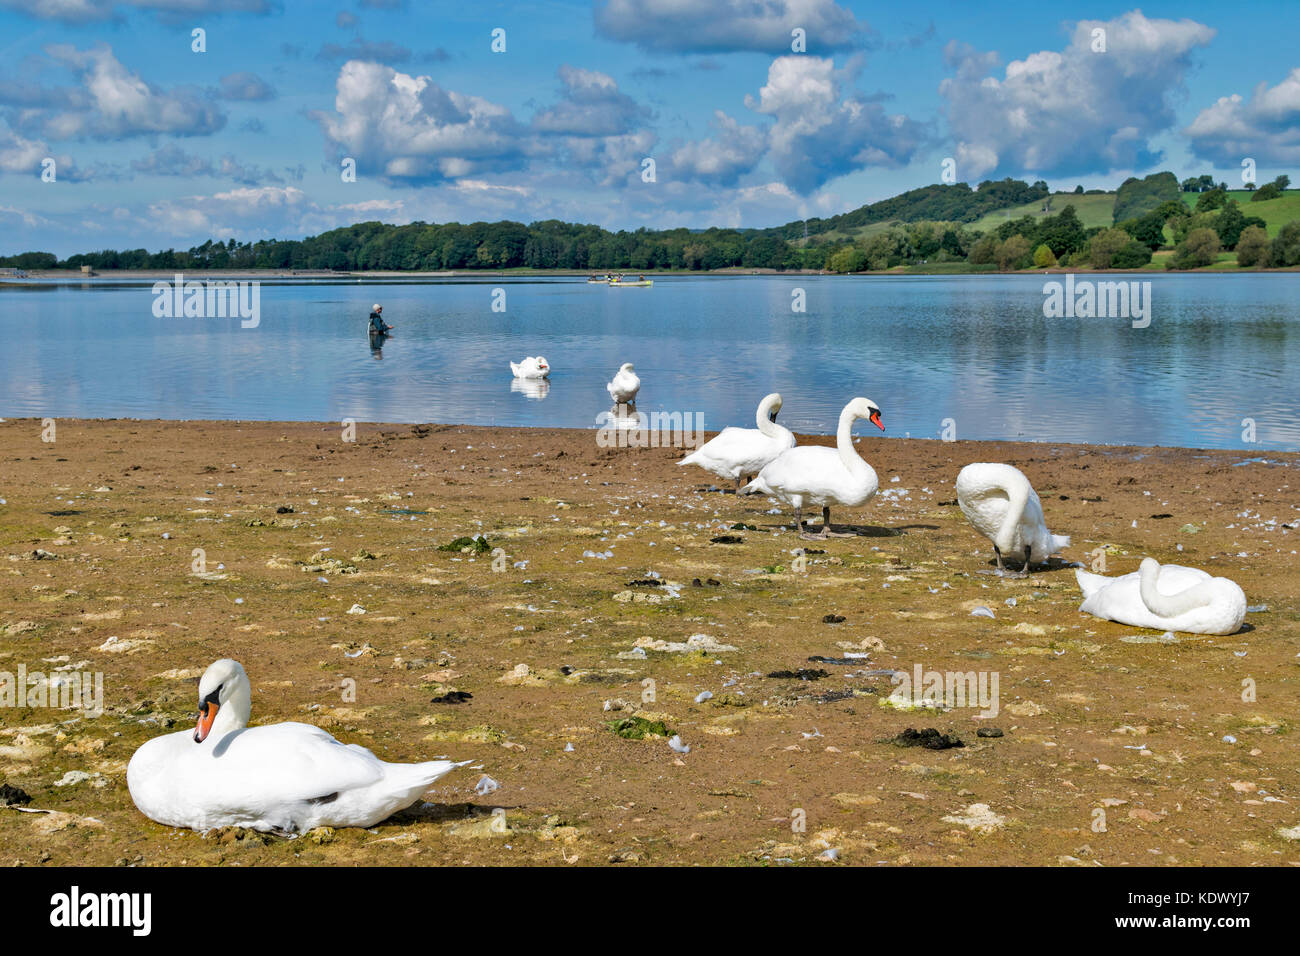 BLAGDON LAKE SOMERSET ENGLAND TROUT FISHERMEN FISHING IN BOATS AND WADING IN THE LAKE WITH SWANS RESTING ON THE BANK Stock Photo